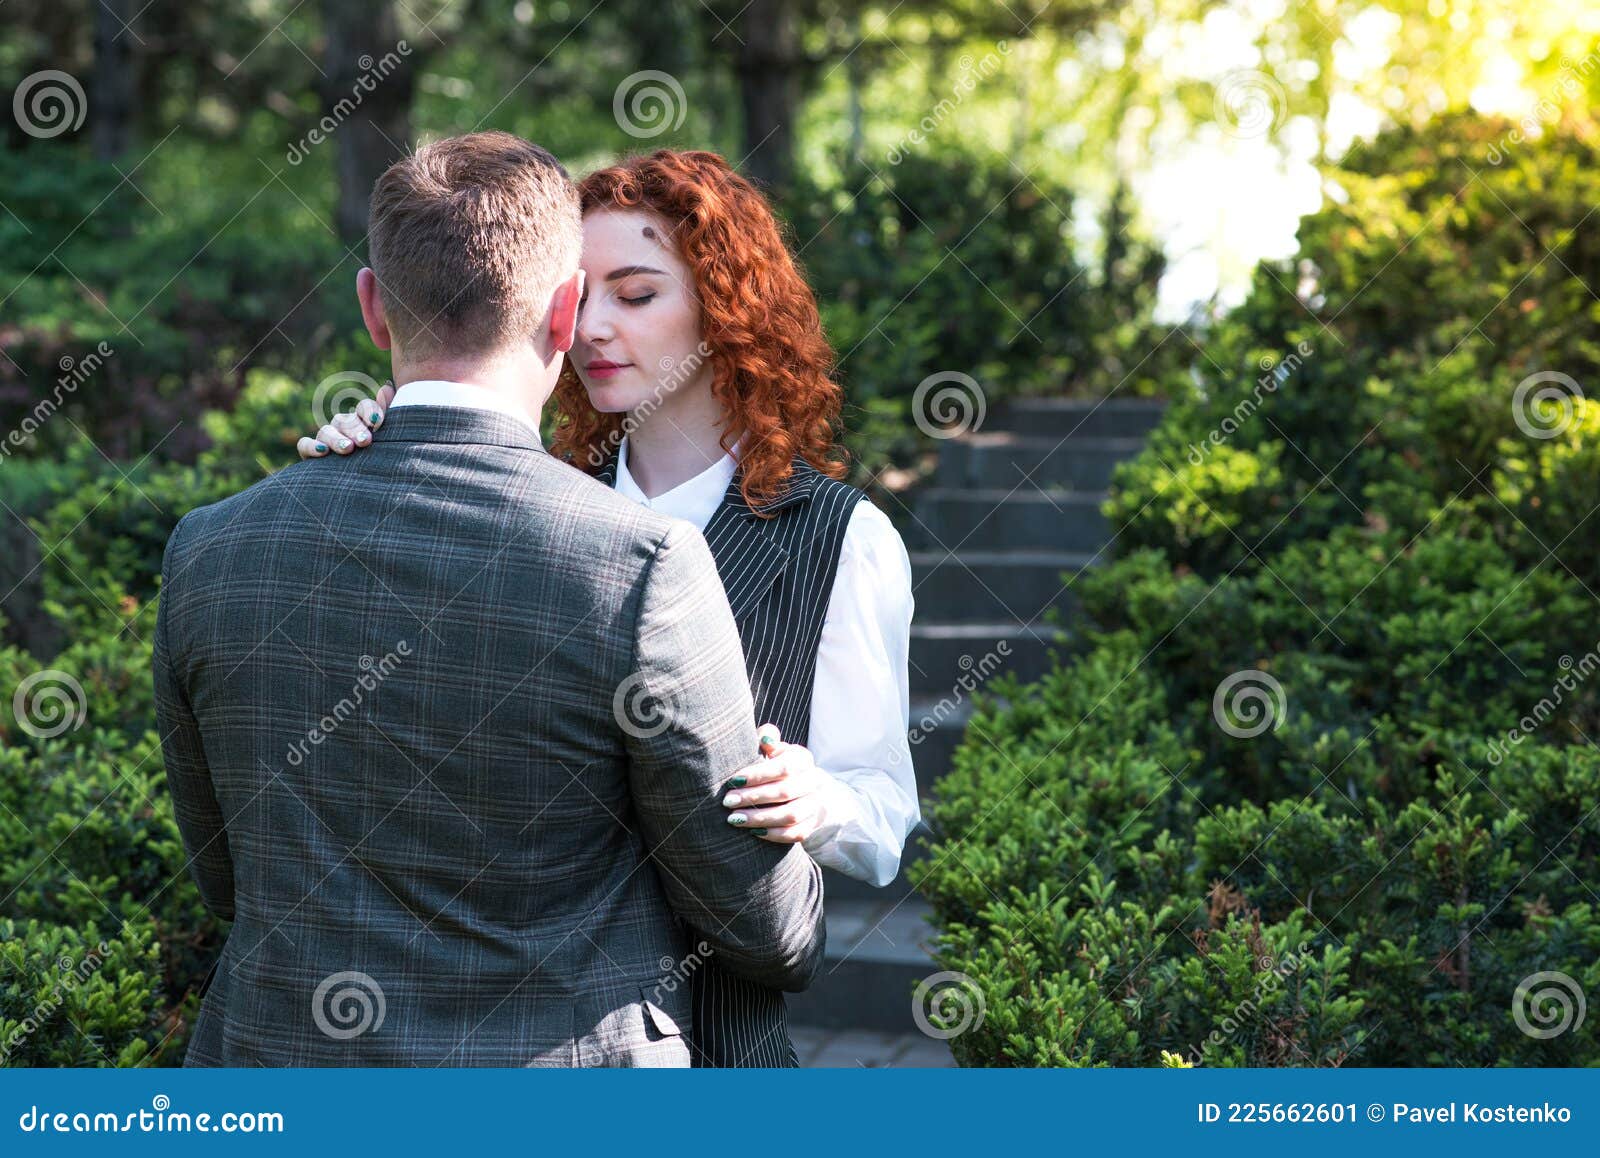 redhead with husband pic